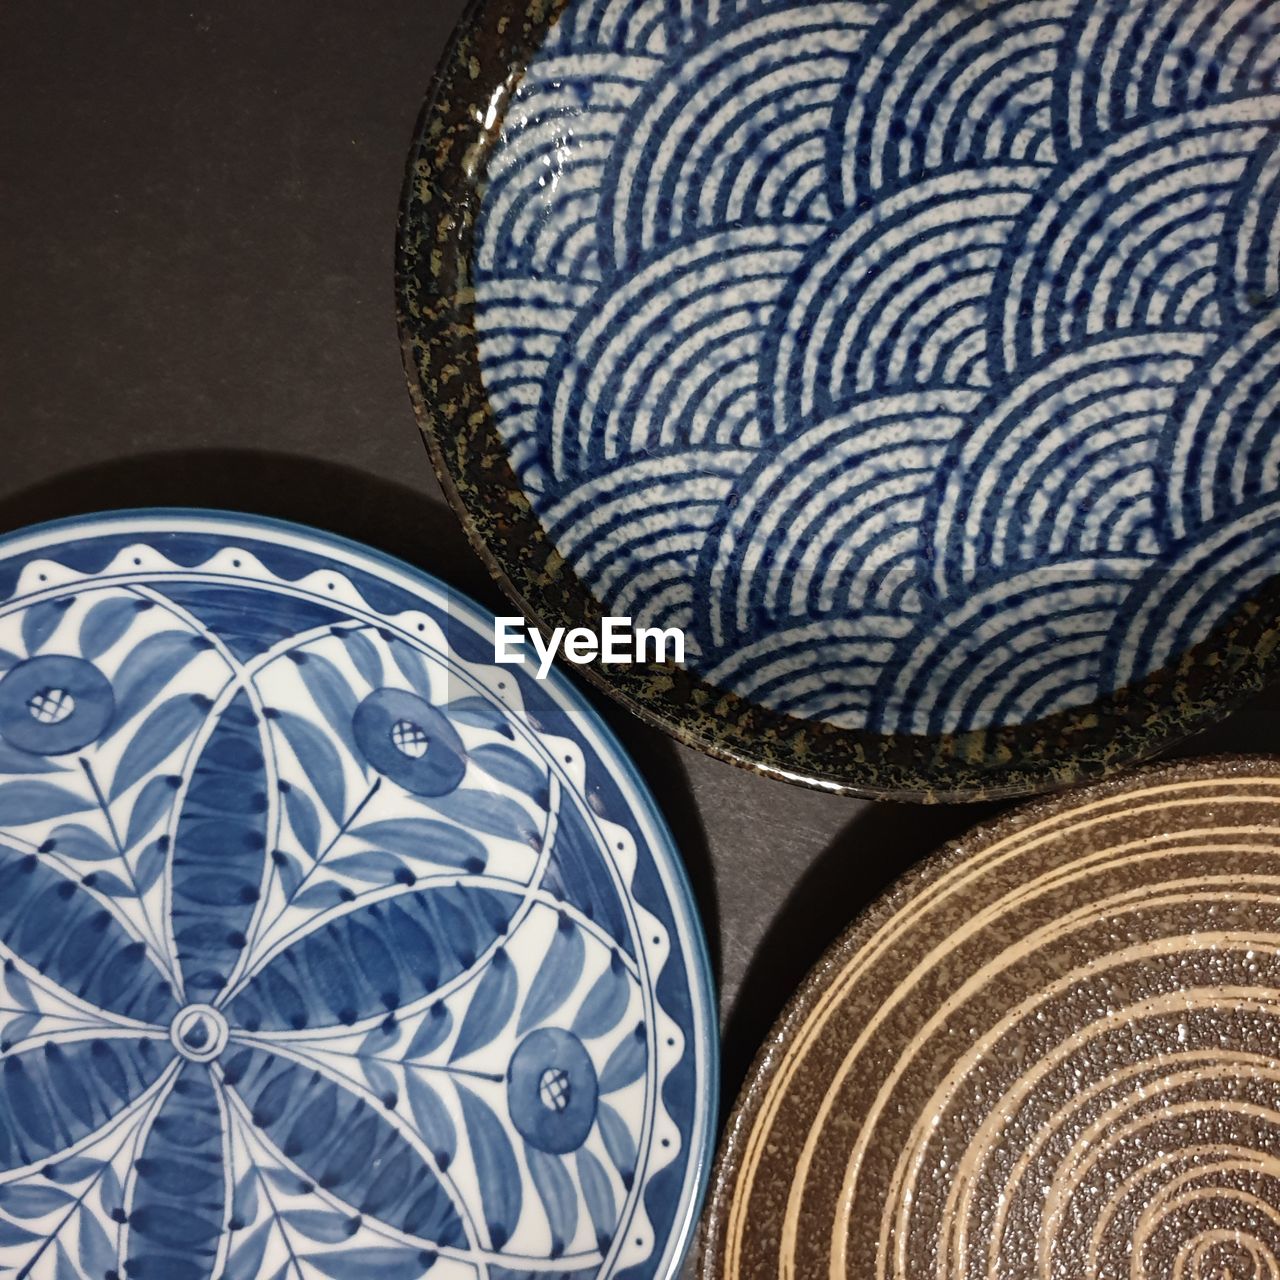 High angle view patterns on bowls